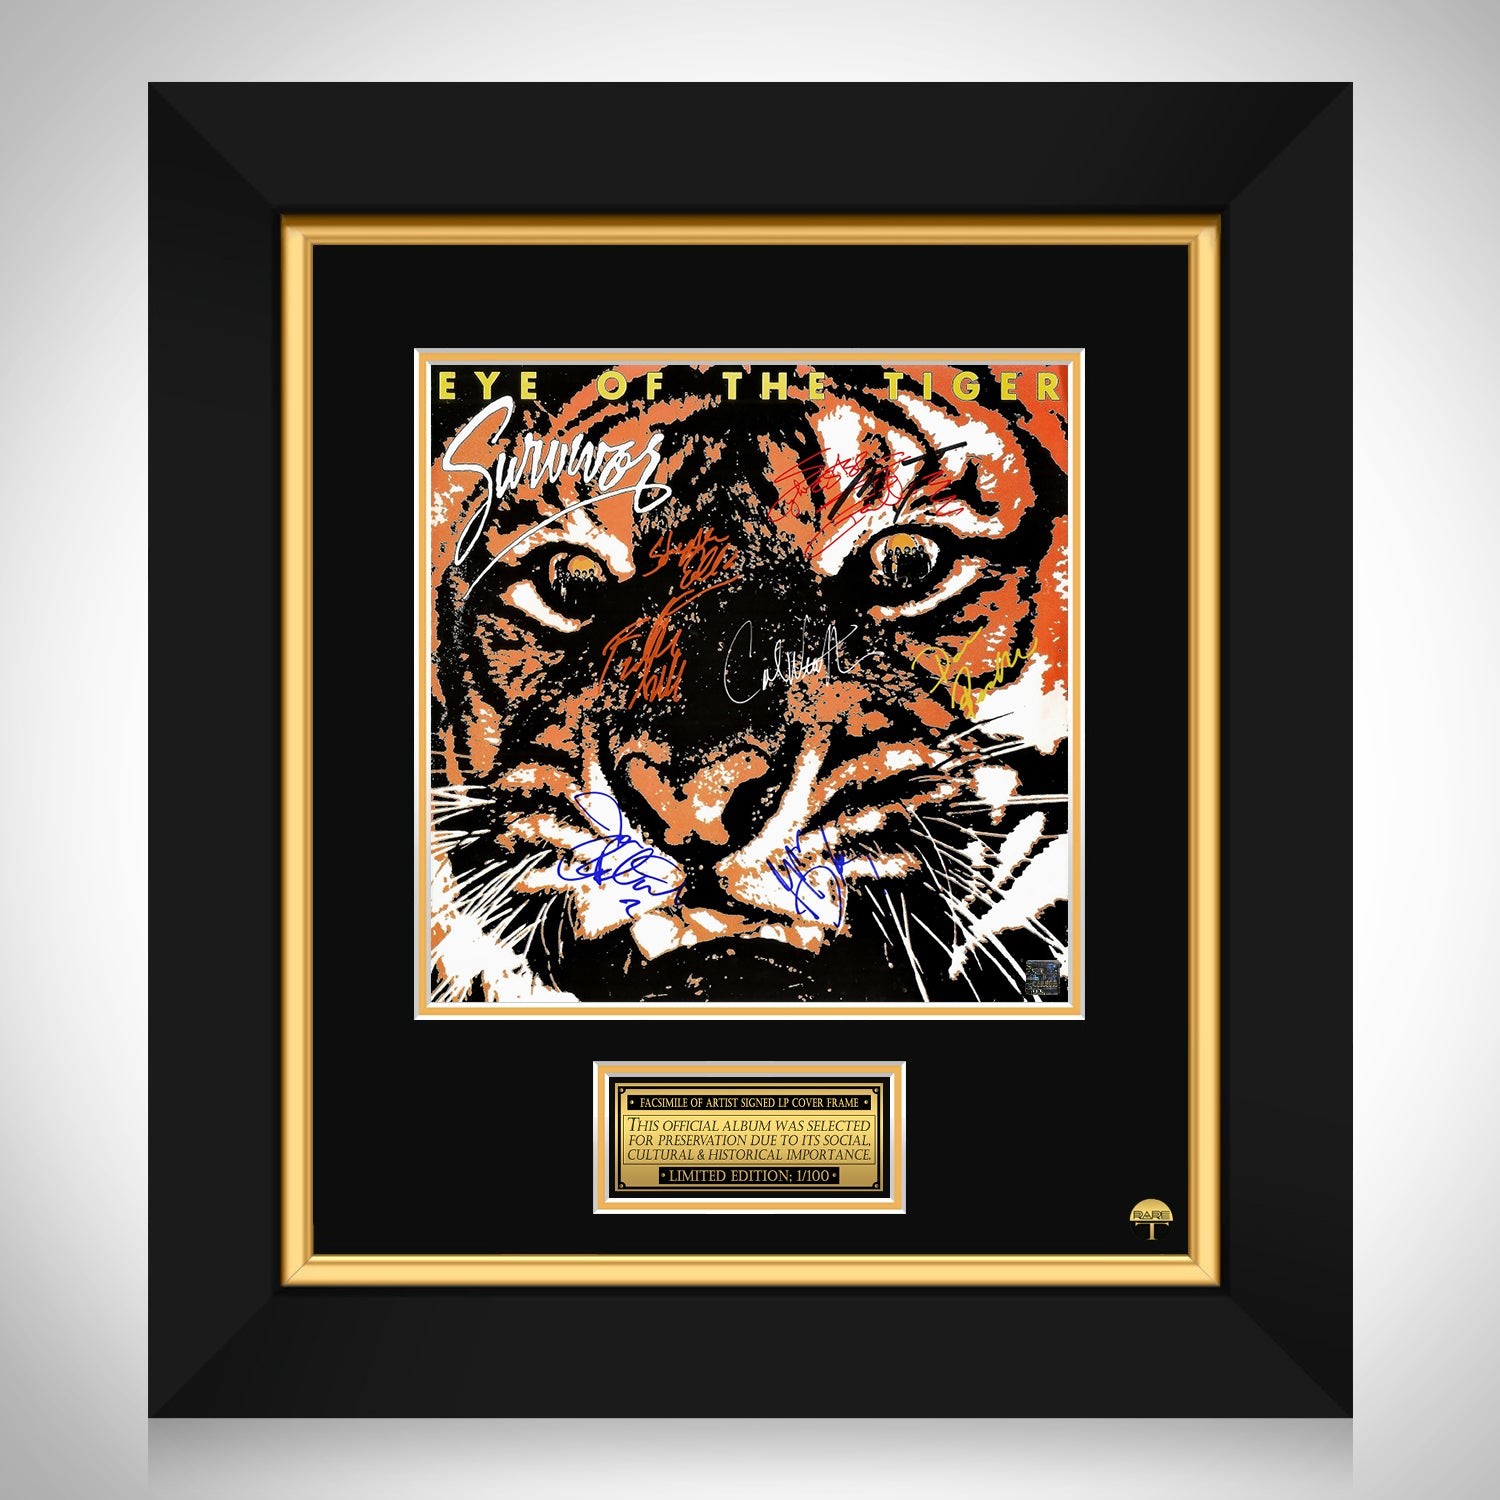 Survivor - The Eye of the Tiger LP Cover Limited Signature Edition Custom  Frame